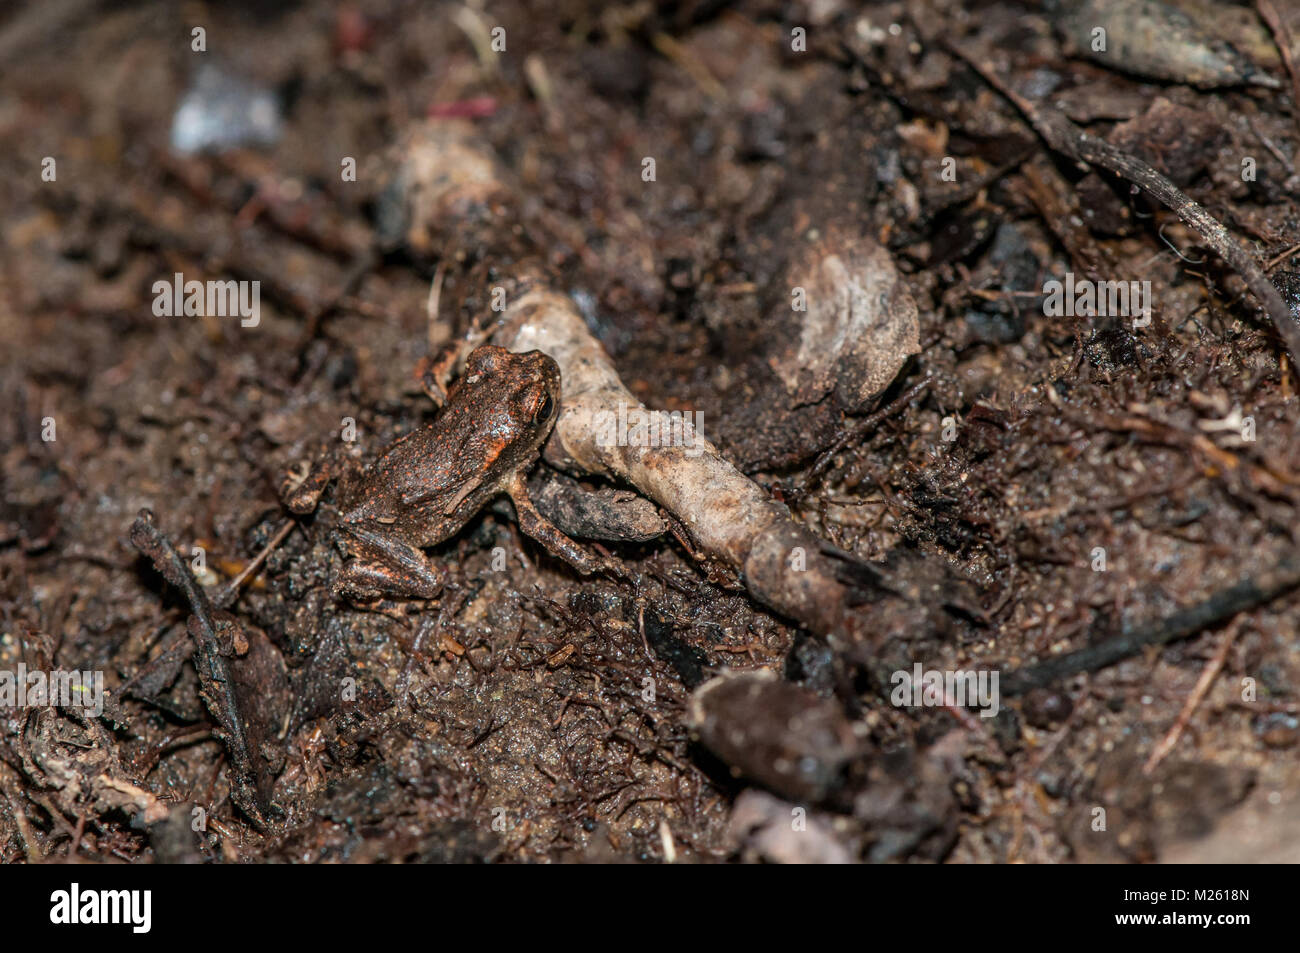 small common midwife toad (Alytes obstetricans obstetricans) camouflaged  on the forest ground, Banyoles, Catalonia, Spain Stock Photo